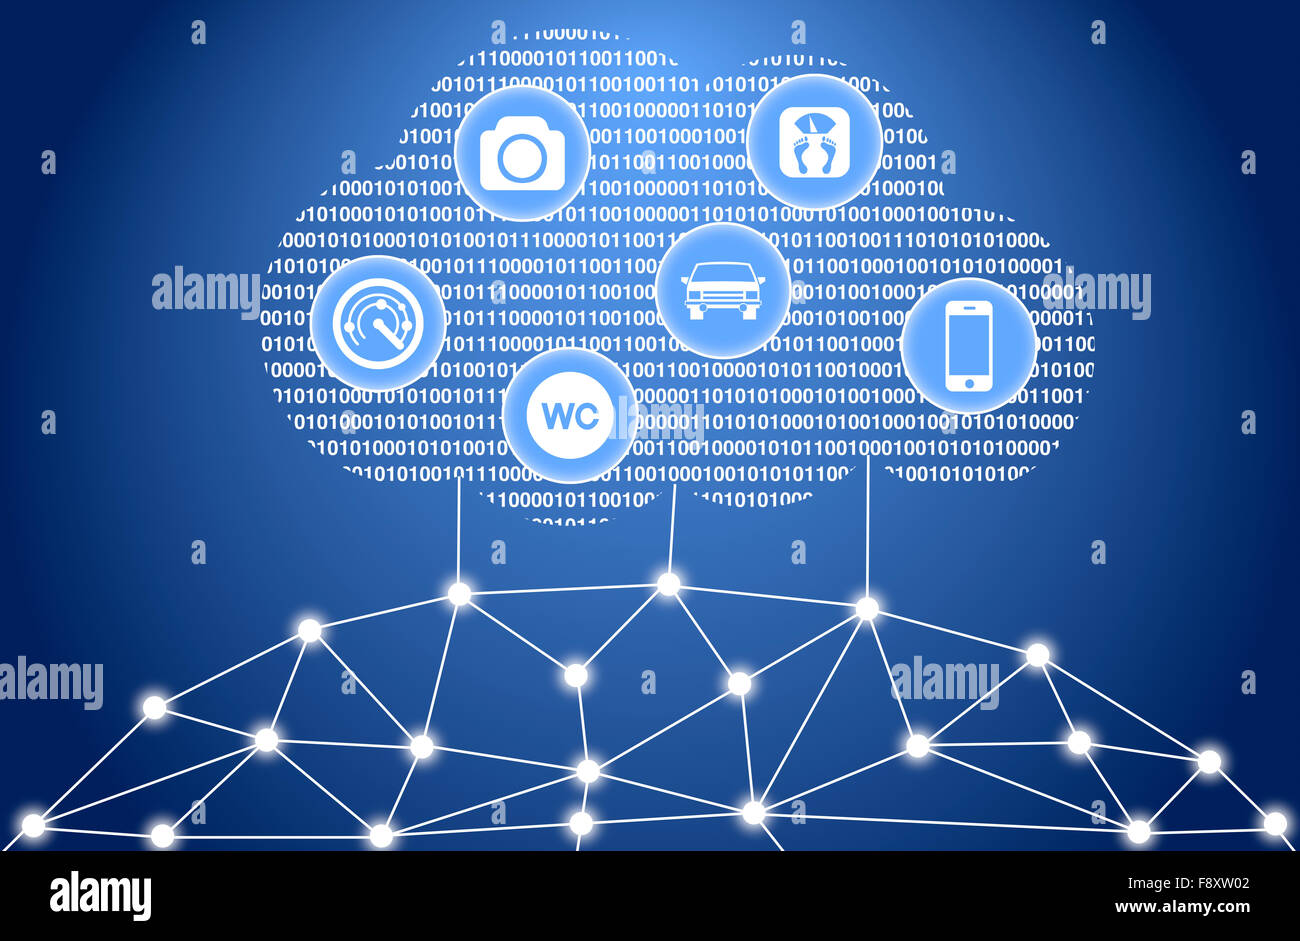 The internet of things cloud concept illustration Stock Photo